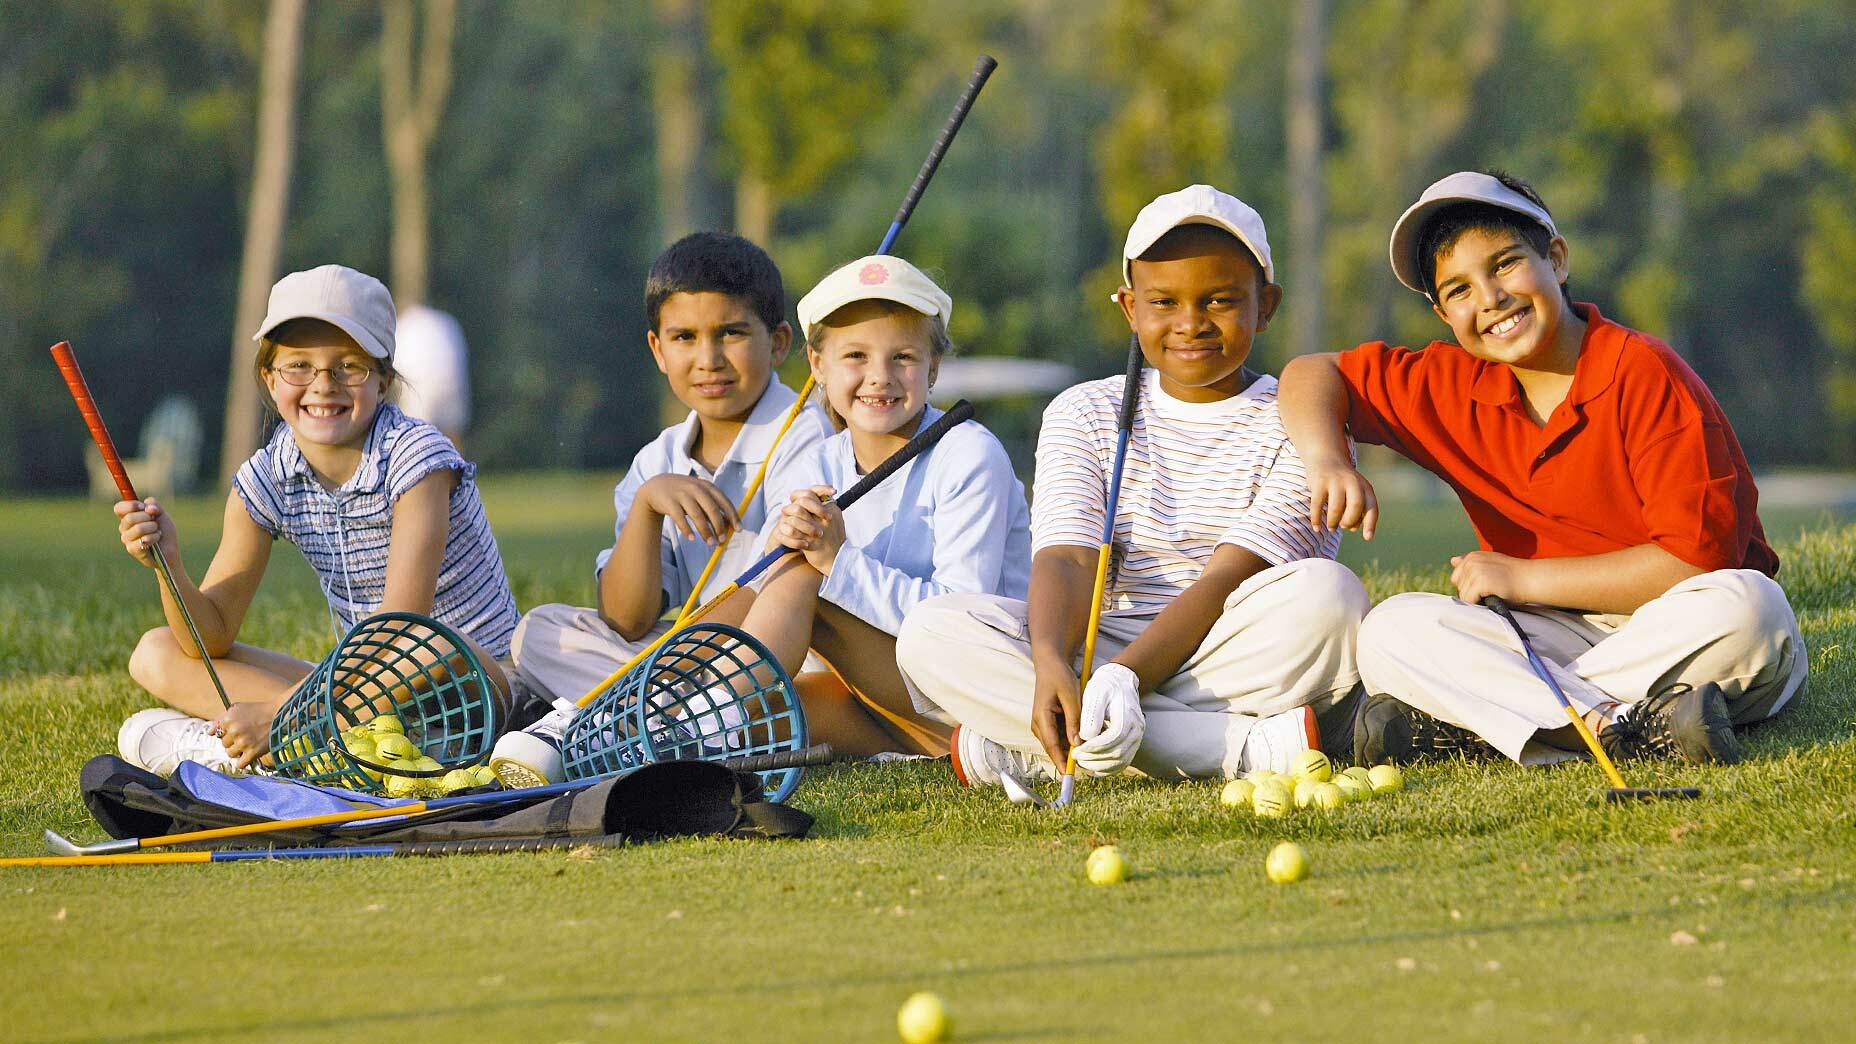 An image of children with golf clubs sitting on a golf course. 